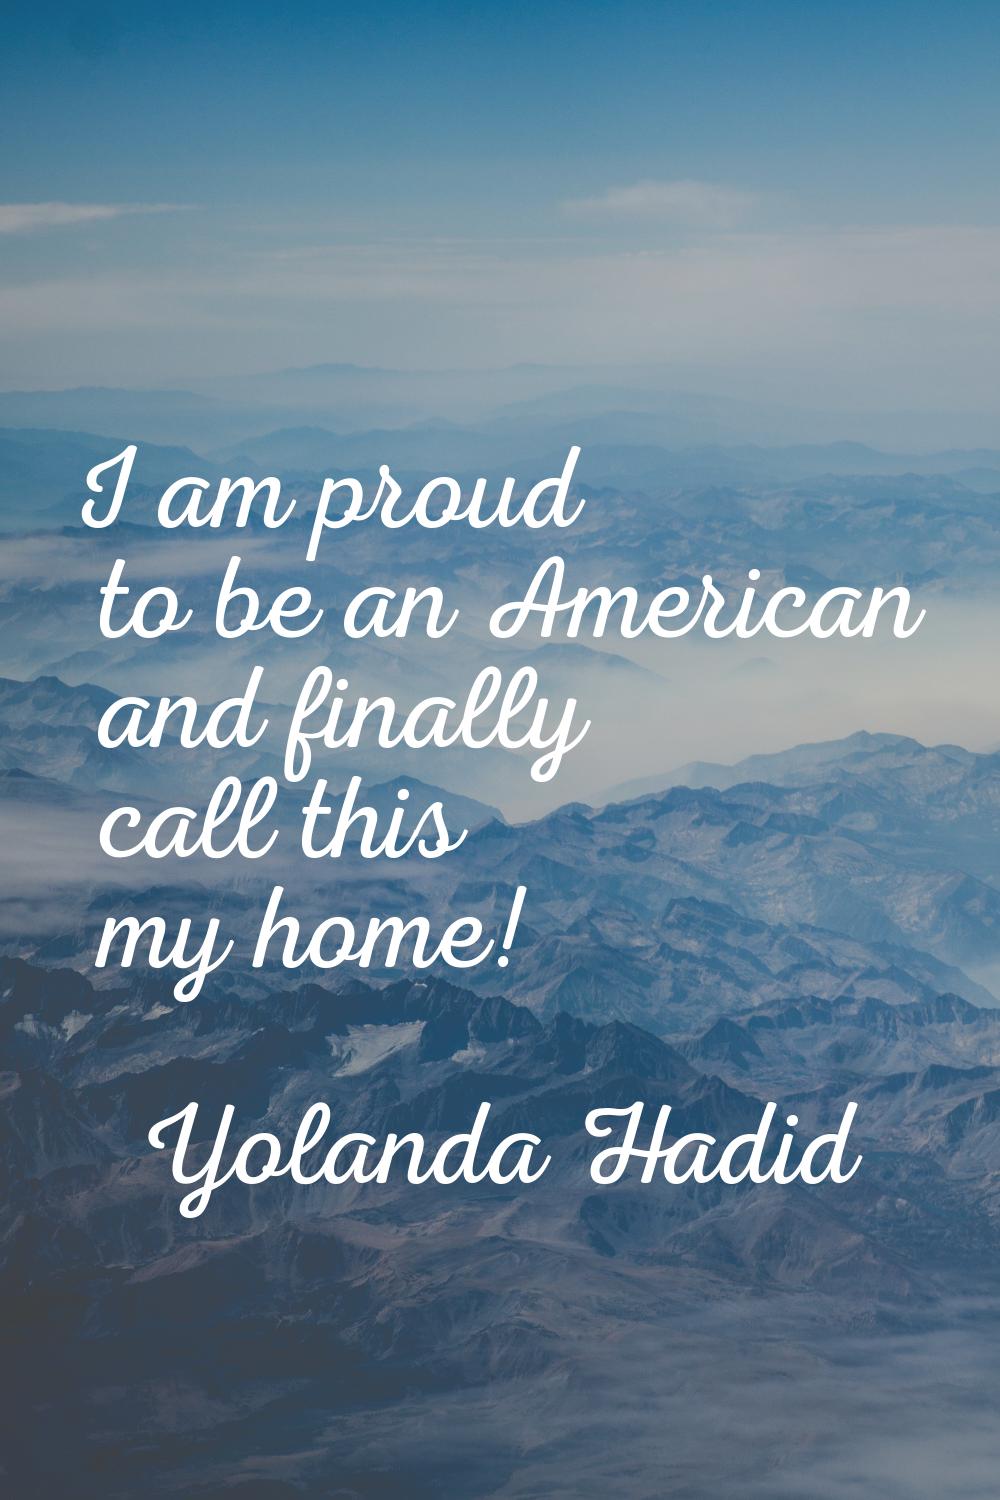 I am proud to be an American and finally call this my home!